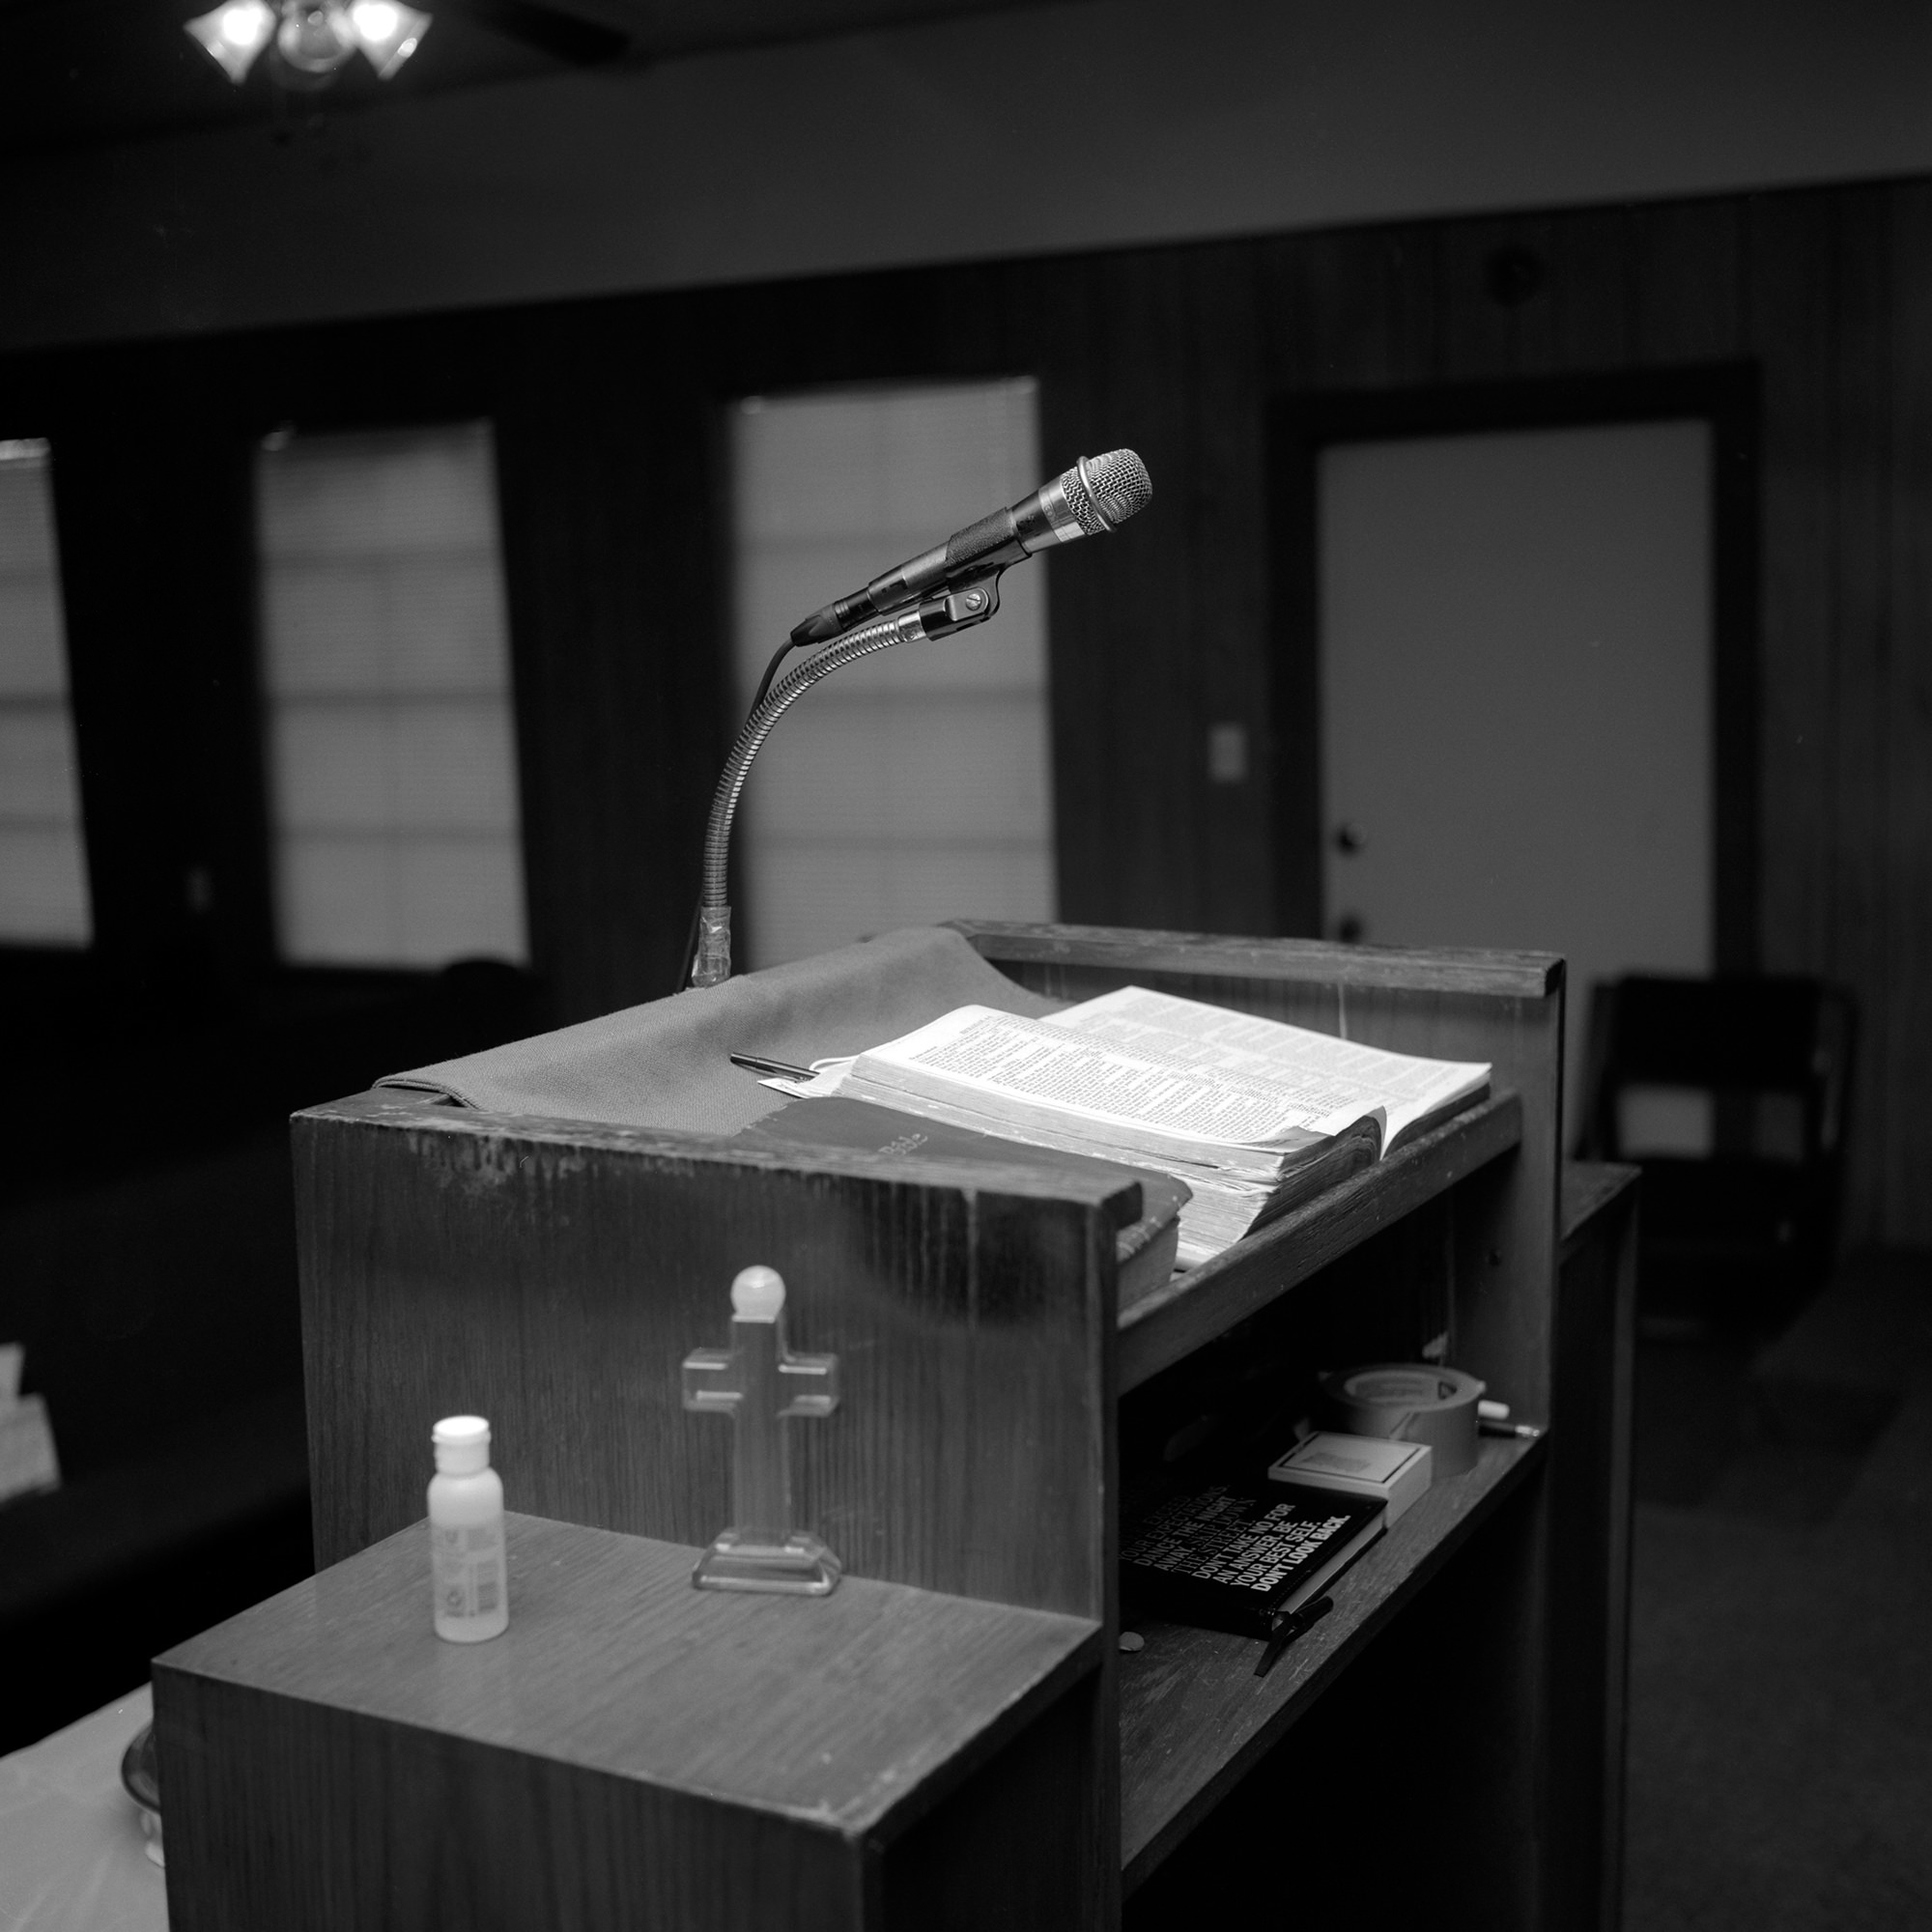 Image description: black-and-white photograph of church pulpit featuring a microphone, opened Bible. Art by Rahim Fortune.